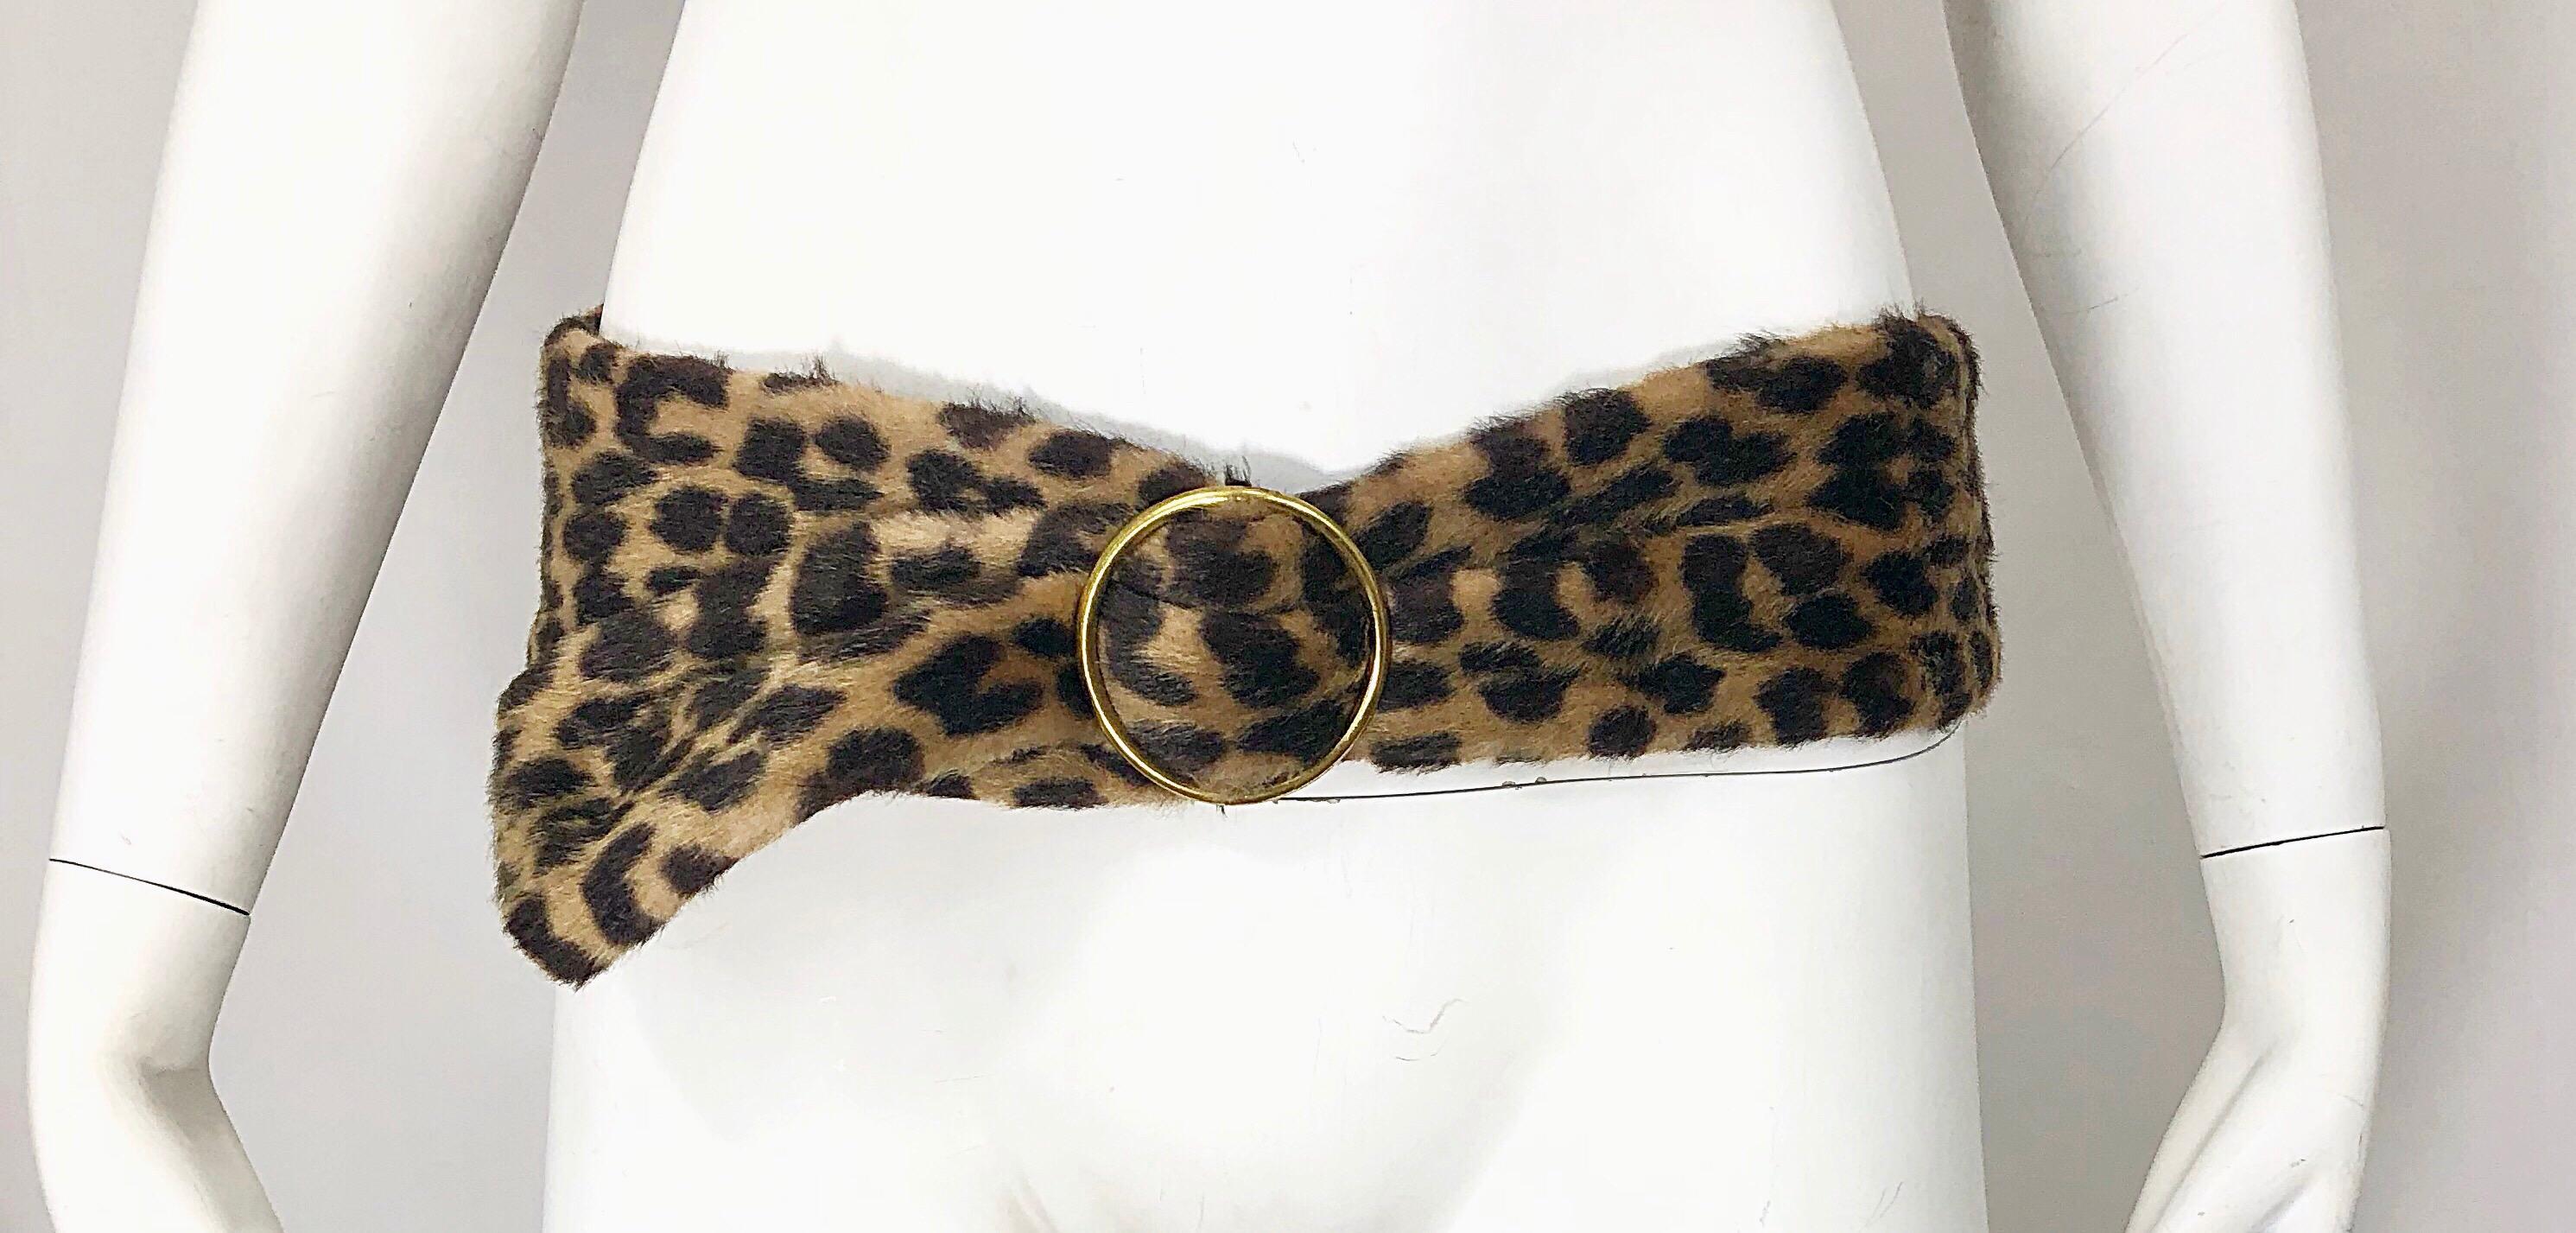 Chic mid 60s DAME NEW YORK leopard / cheetah print faux fur belt! Features soft faux fur with the classic animal print throughout. Gold loop buckle belt allows this to be worn by a vast array of sizes. Great with jeans, shorts, a skirt, trousers, or